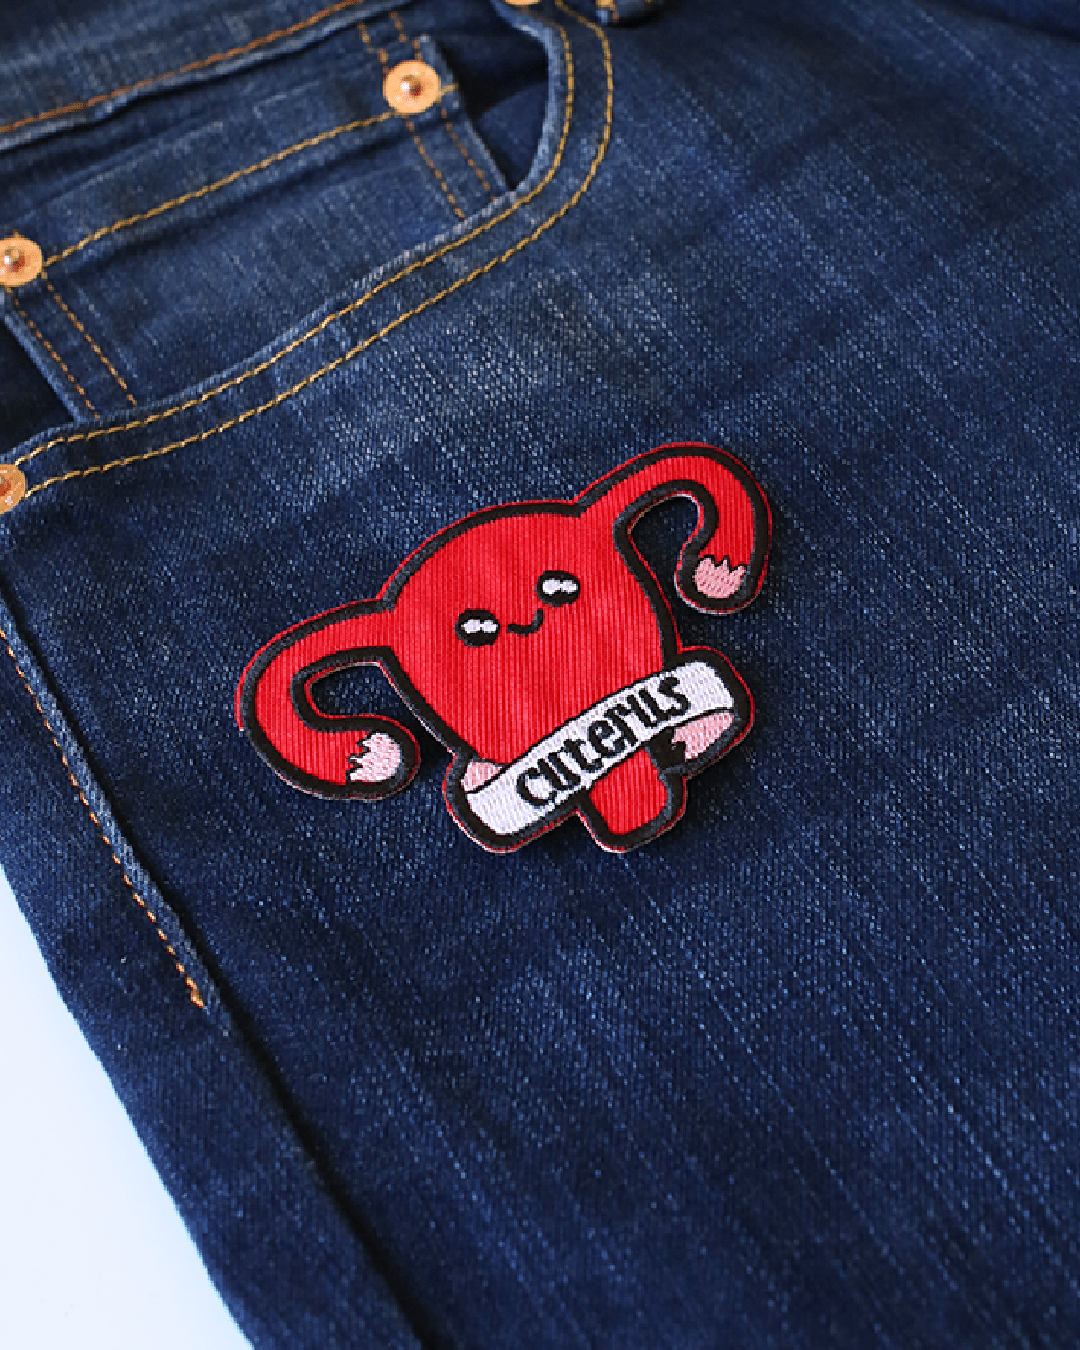 Cuterus Feminist Embroidered Iron On Clothes Patch - Uterus Pro Choice Reproductive Rights Patch - Cuterus Feminist Patch